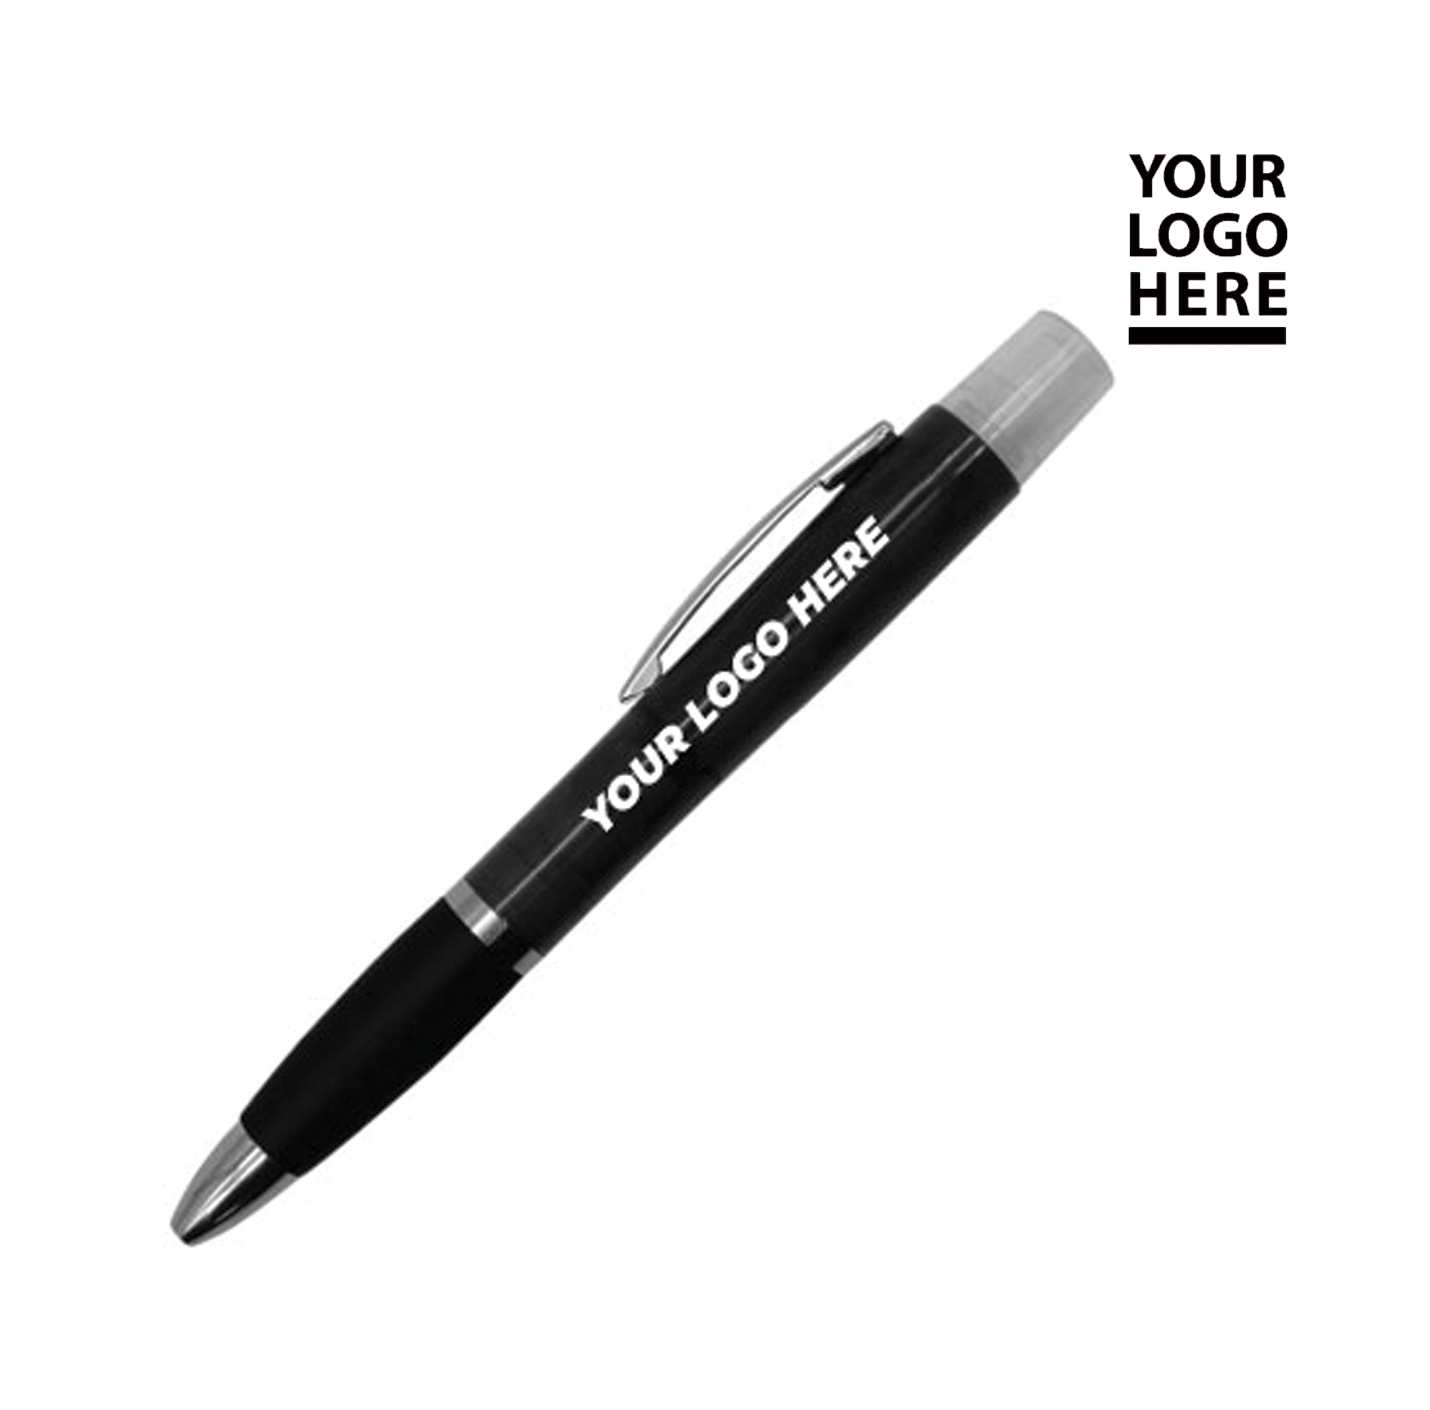 2 in 1 Promotional Pens with sanitizer